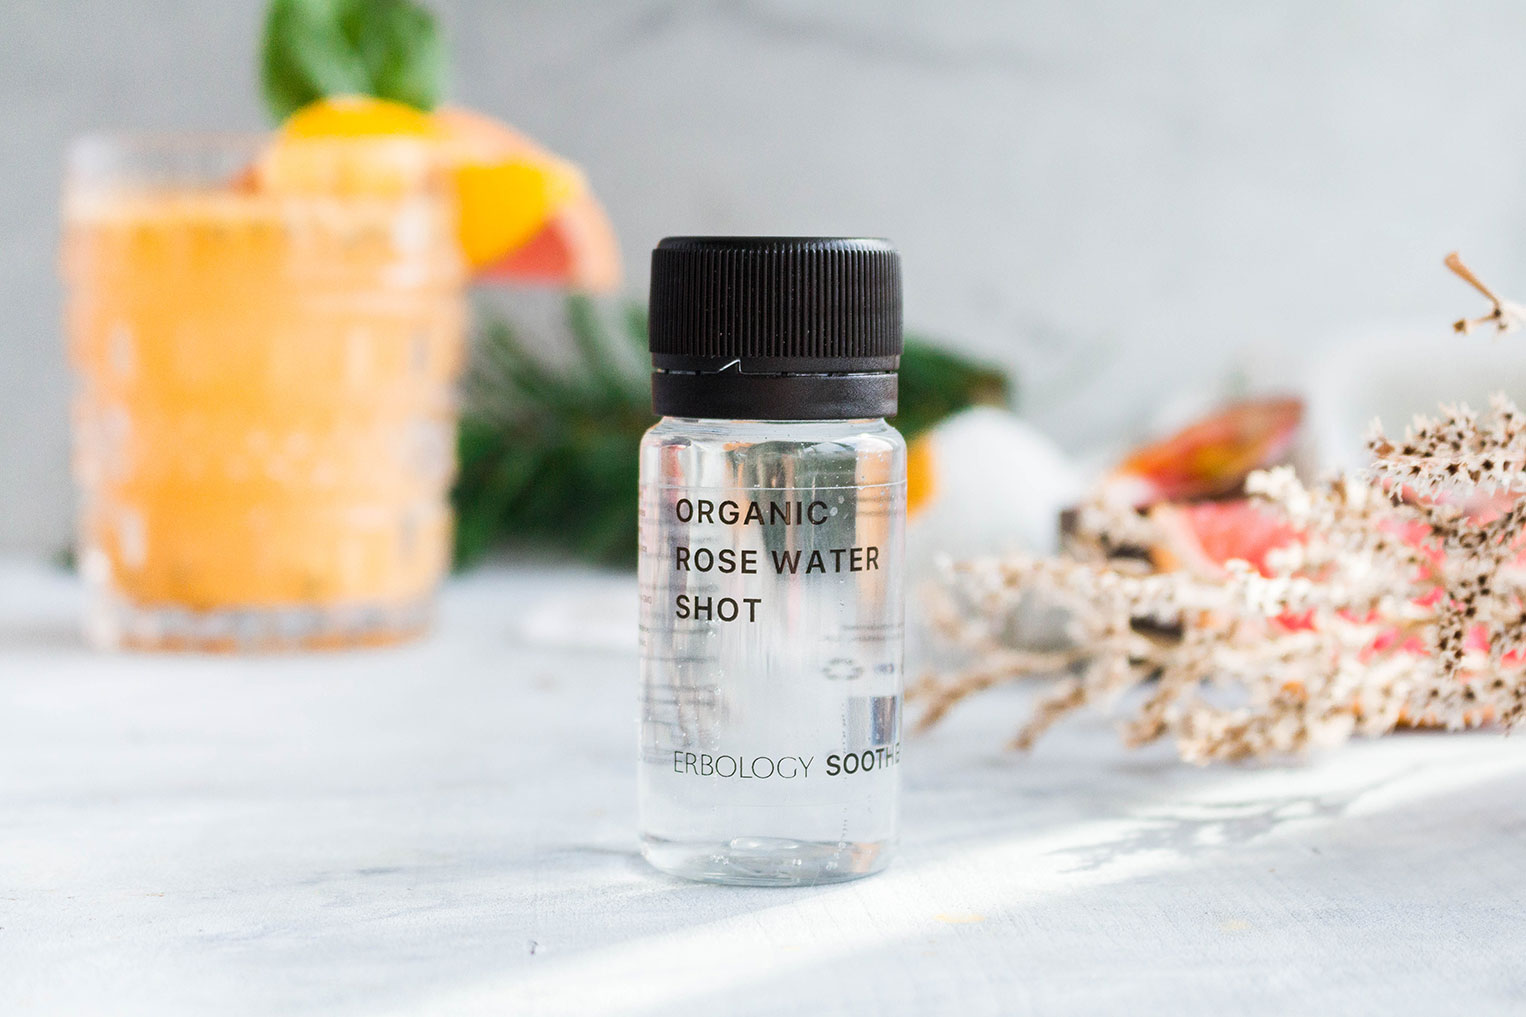 Introducing pure Rose Water Shot to soothe and hydrate.